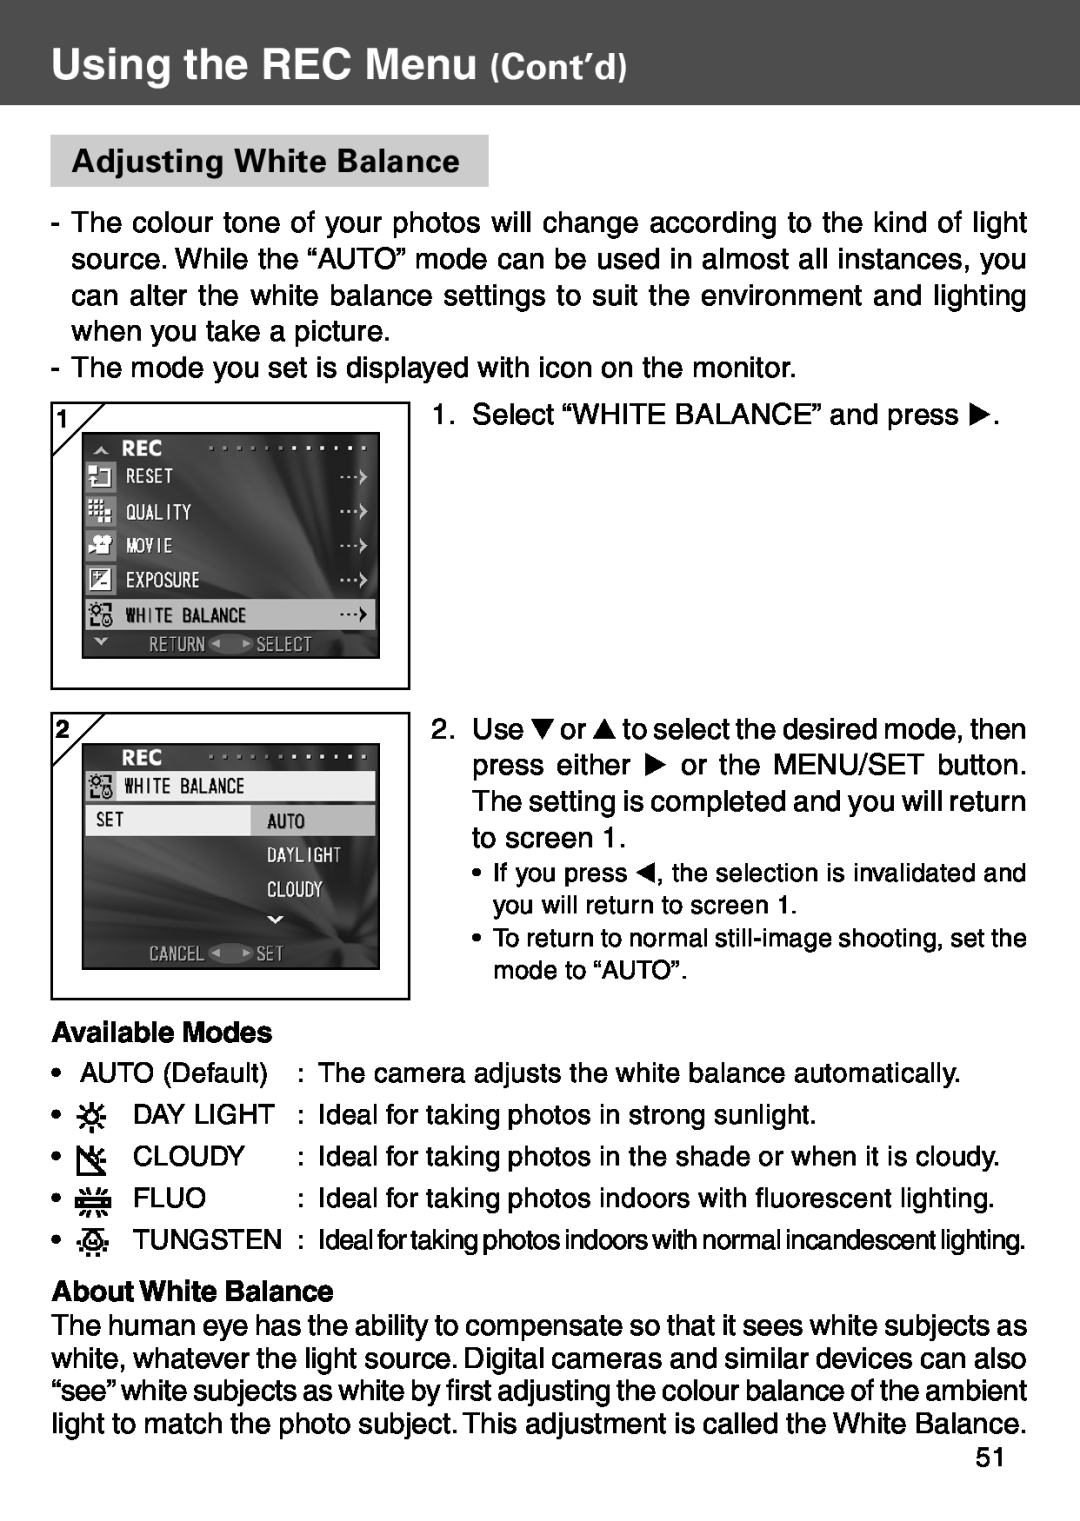 Konica Minolta KD-500Z user manual Adjusting White Balance, Available Modes, About White Balance, Using the REC Menu Cont’d 